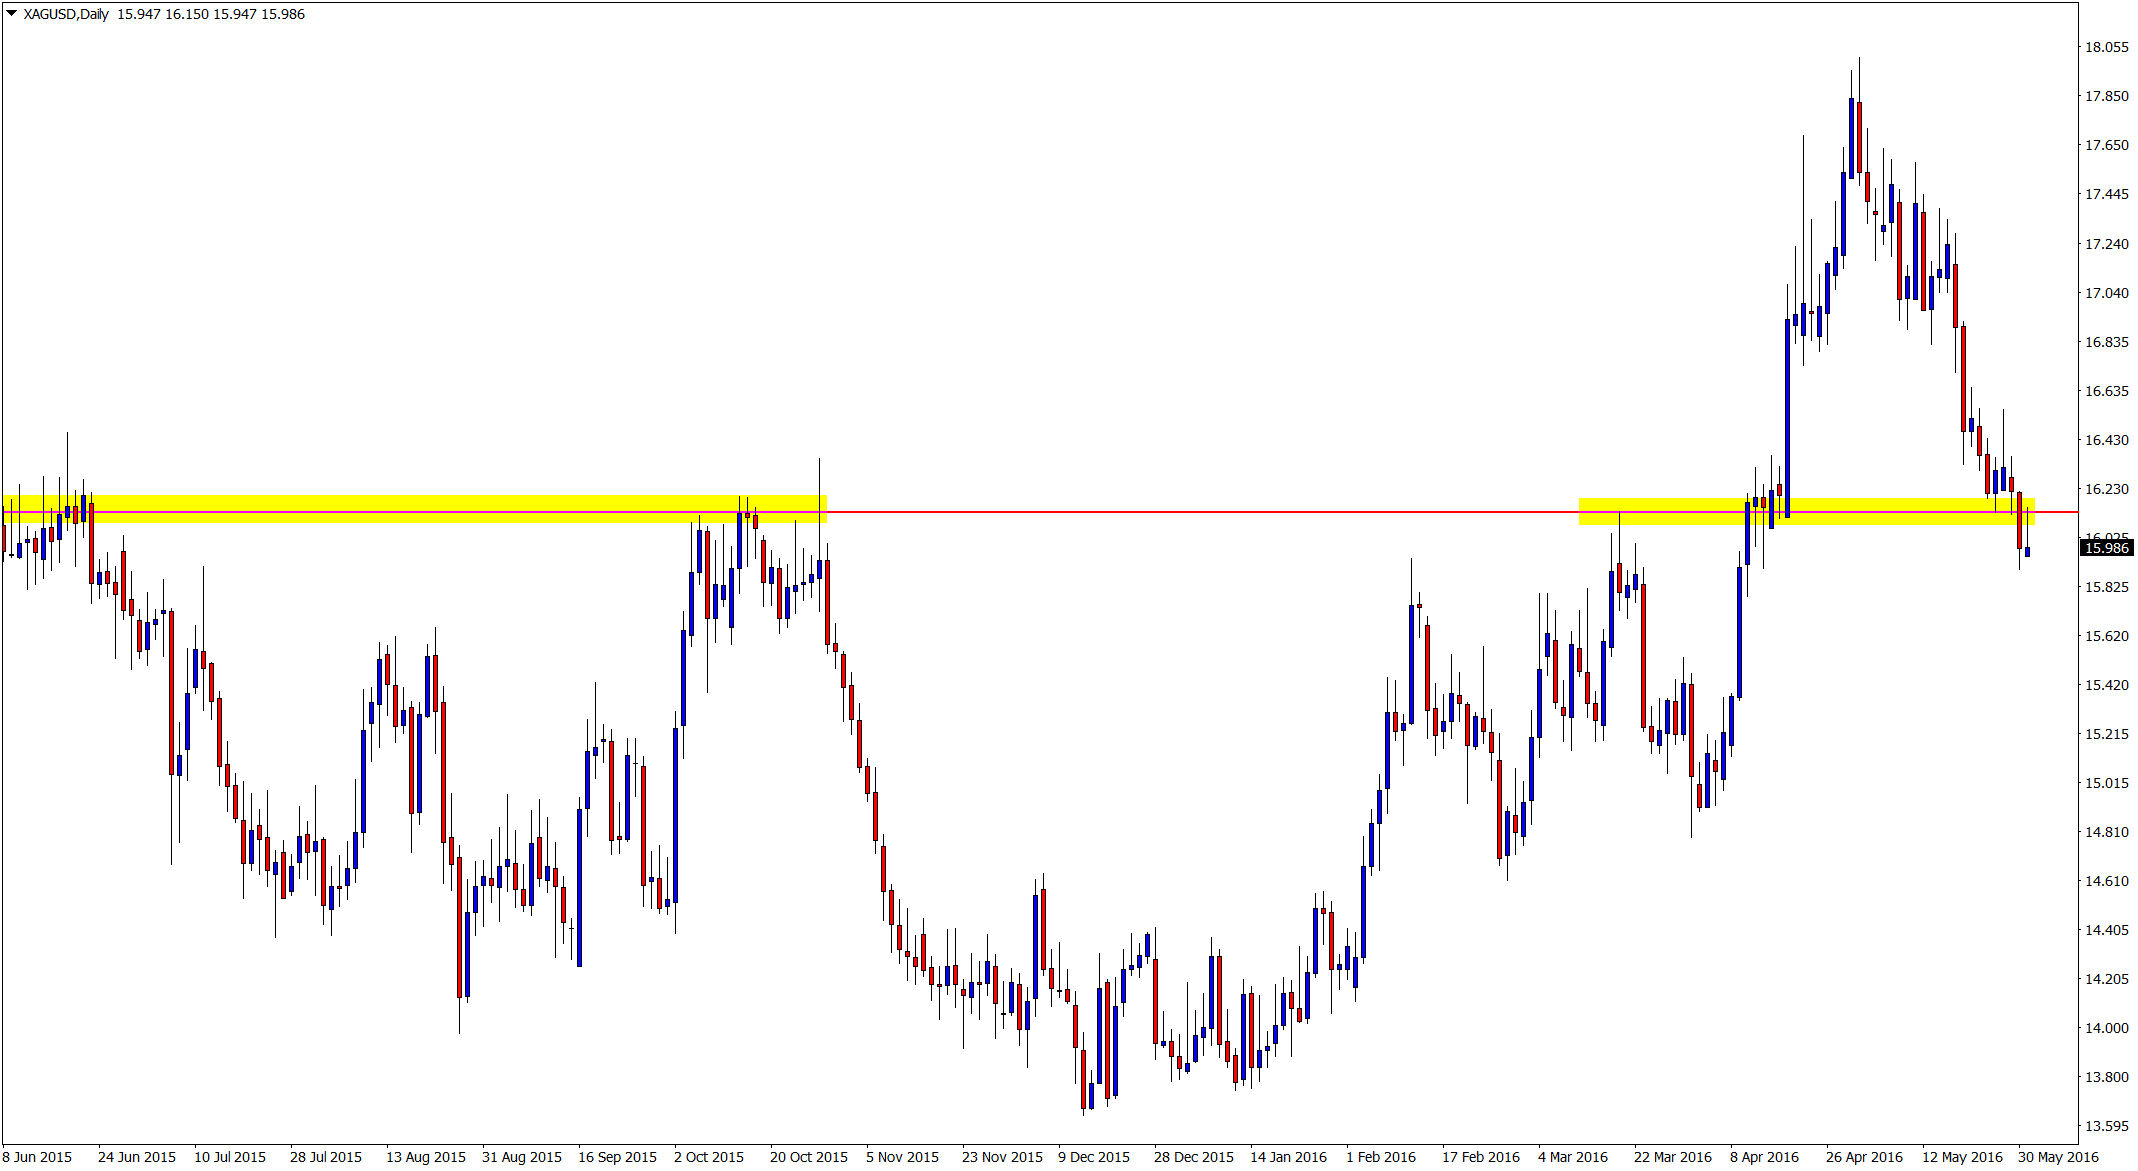 Silver daily price action chart